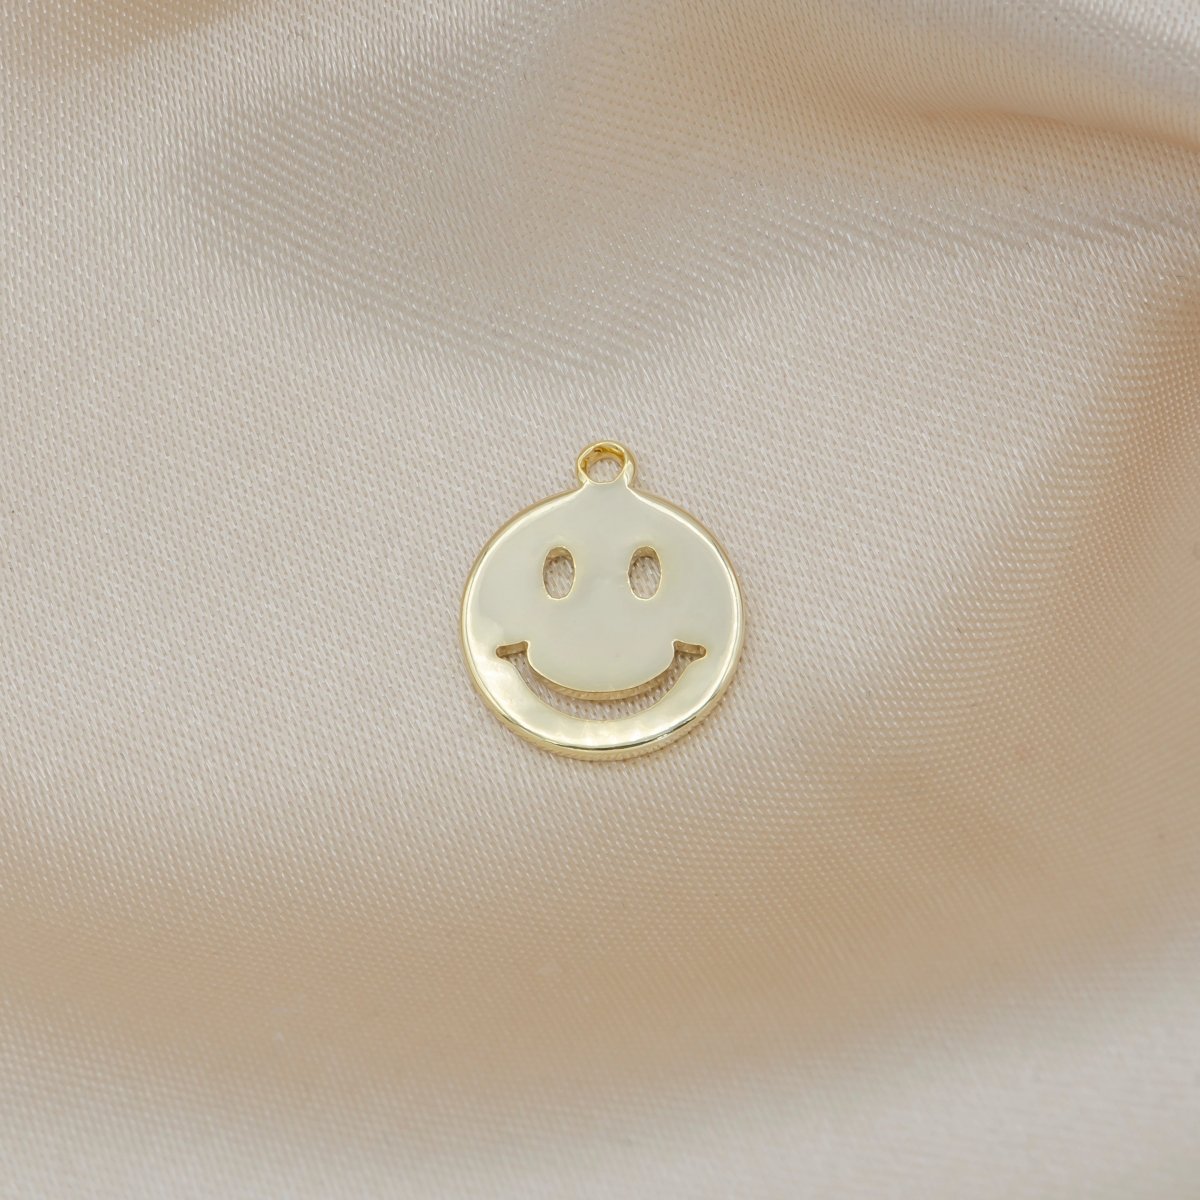 Tiny Golden Smiley Face Charm, Gold Plated Happy Joy Smiling Expression Face Charm Pendant GP-299 - DLUXCA